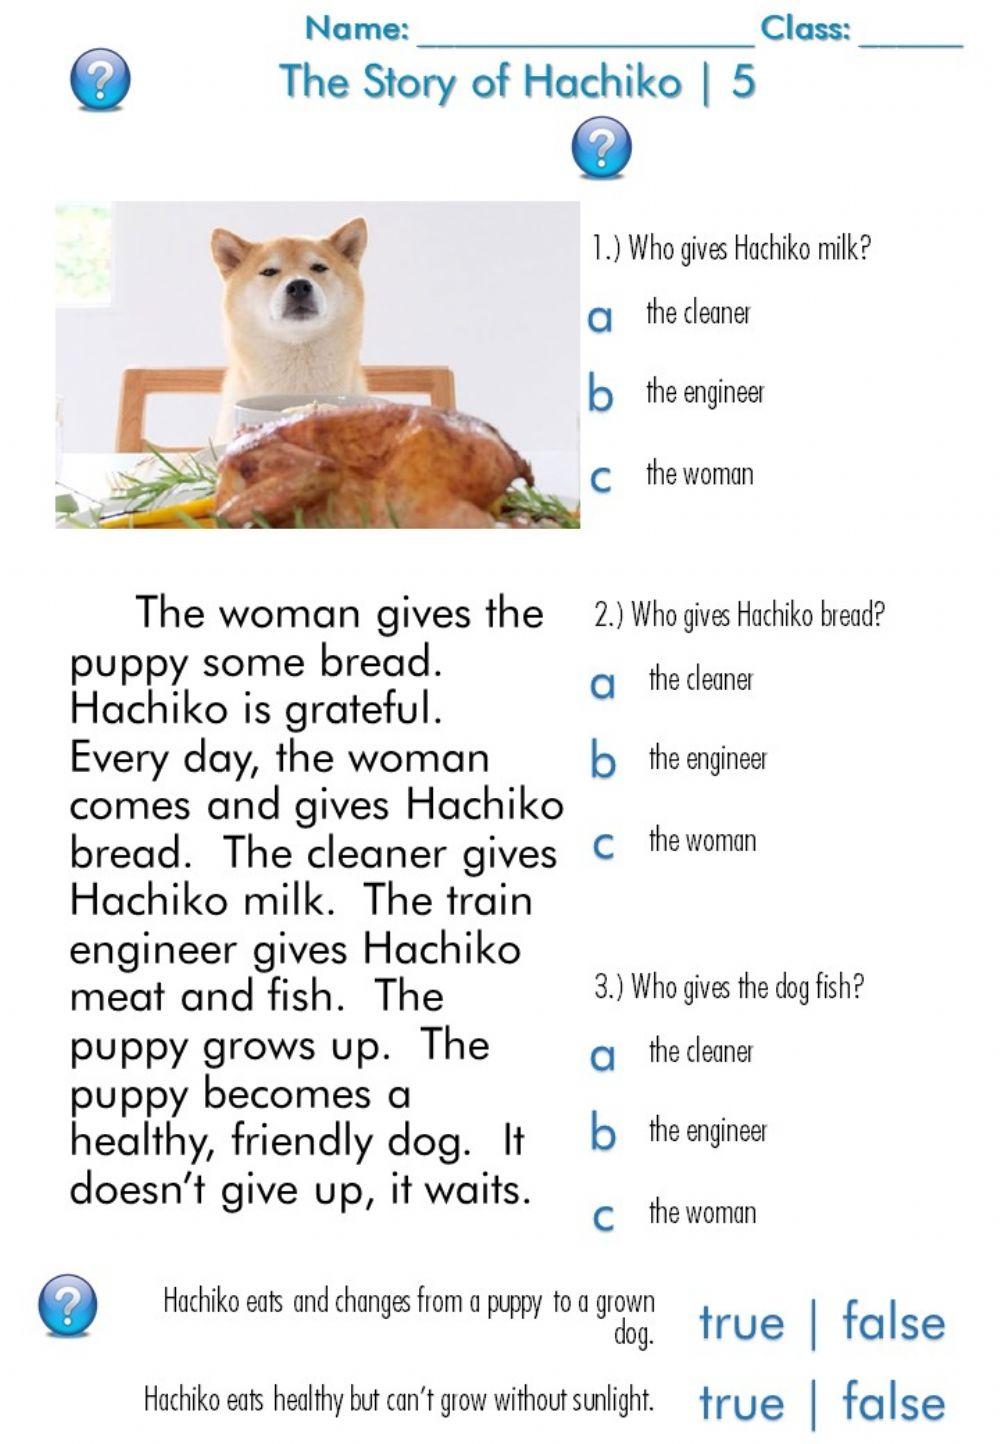 The Story of Hachiko 5